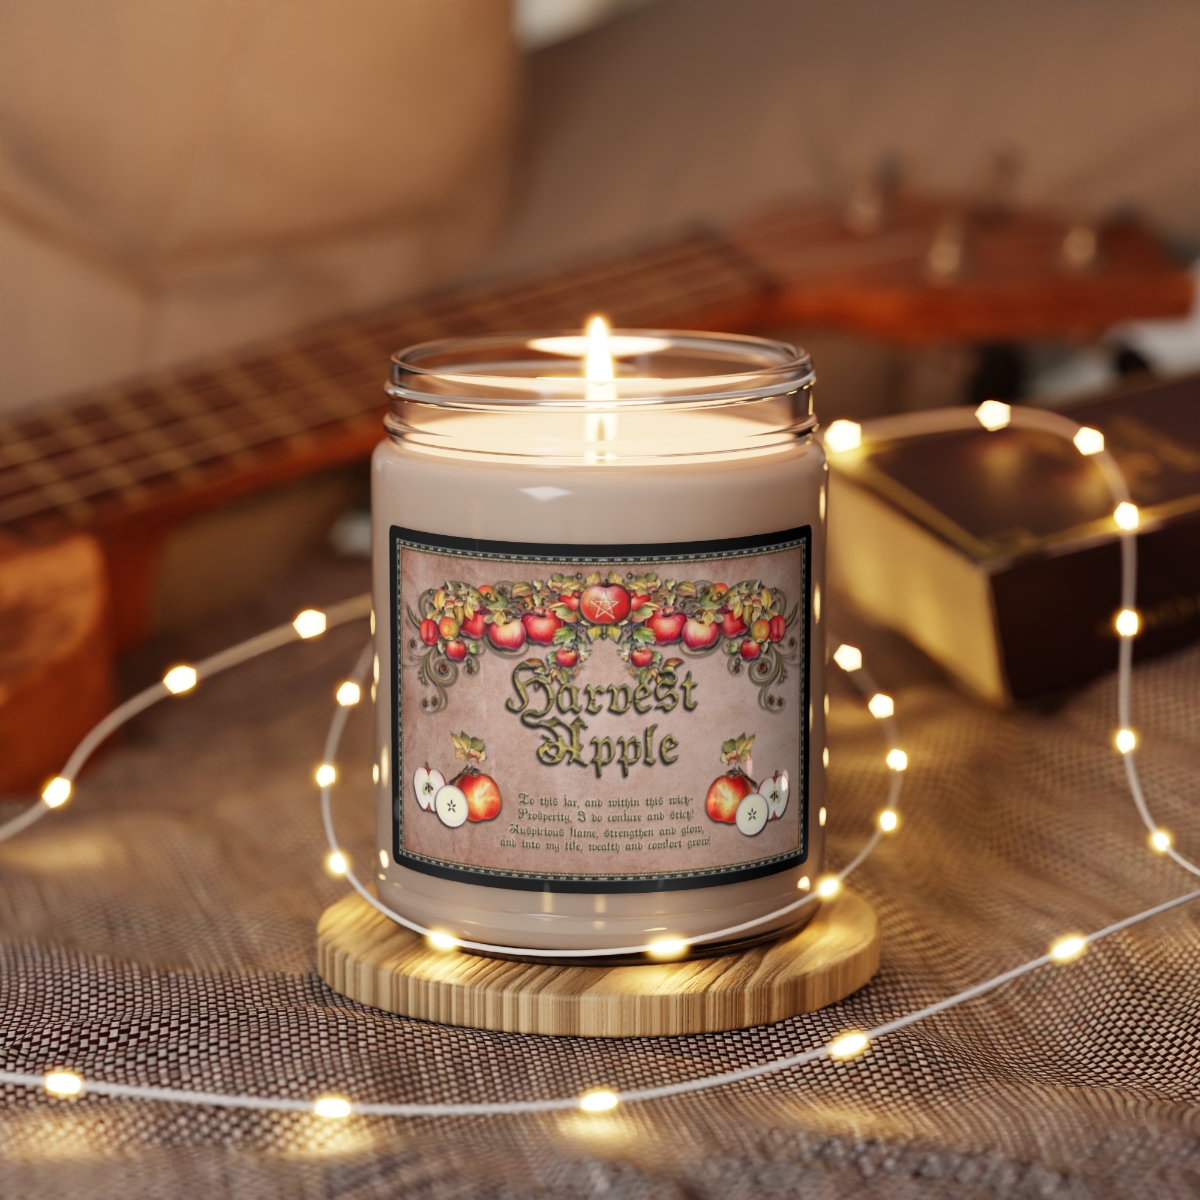 Harvest Apple Scented Soy Prosperity Candle, 9oz product thumbnail image